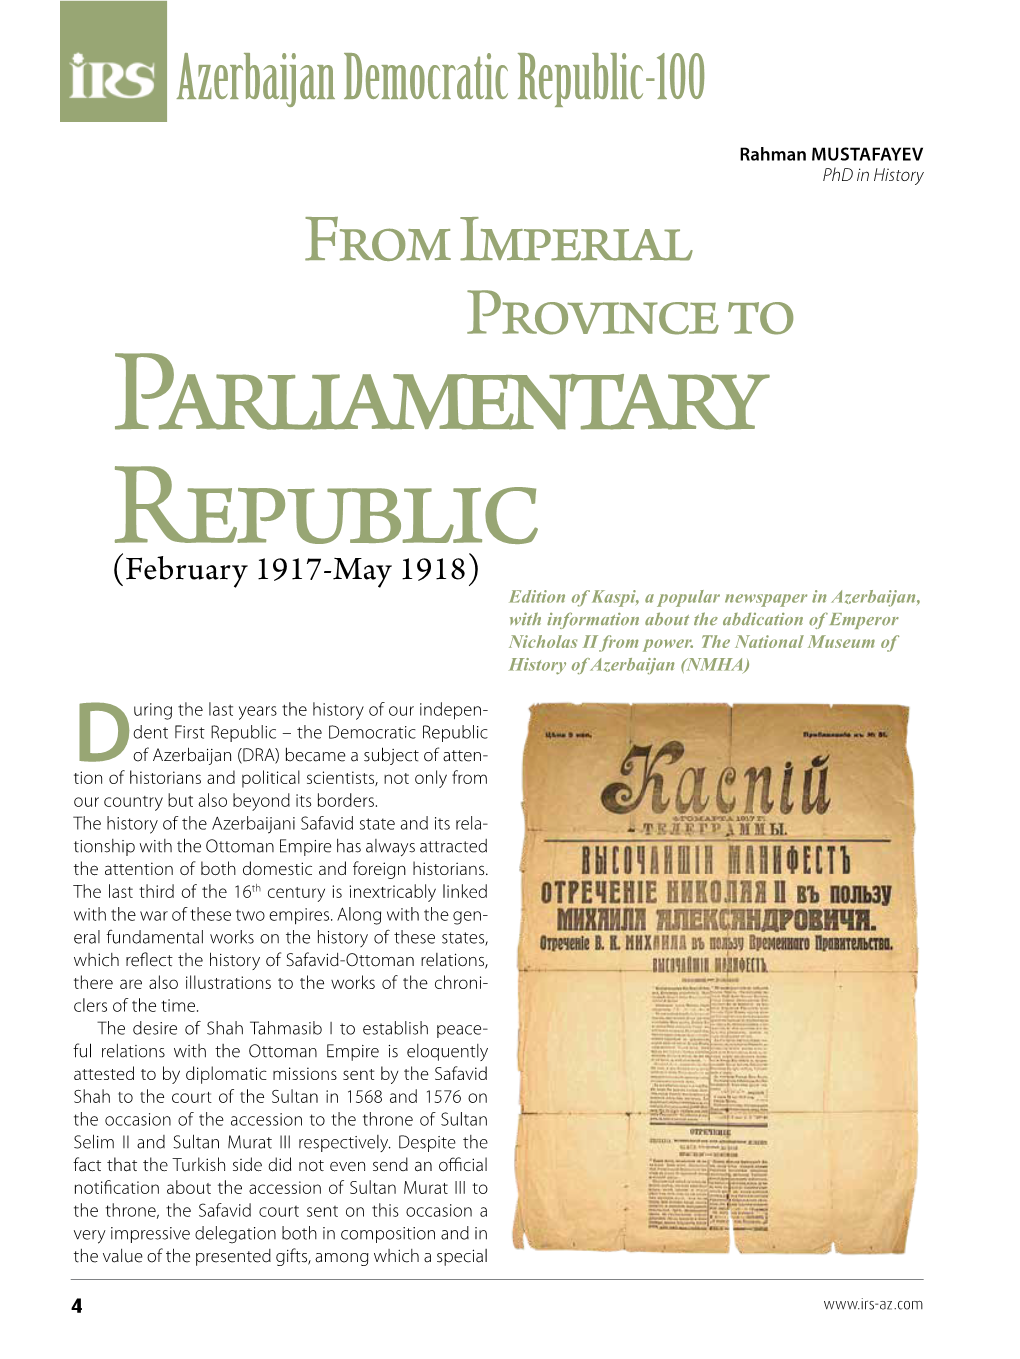 From Imperial Province to Parliamentary Republic